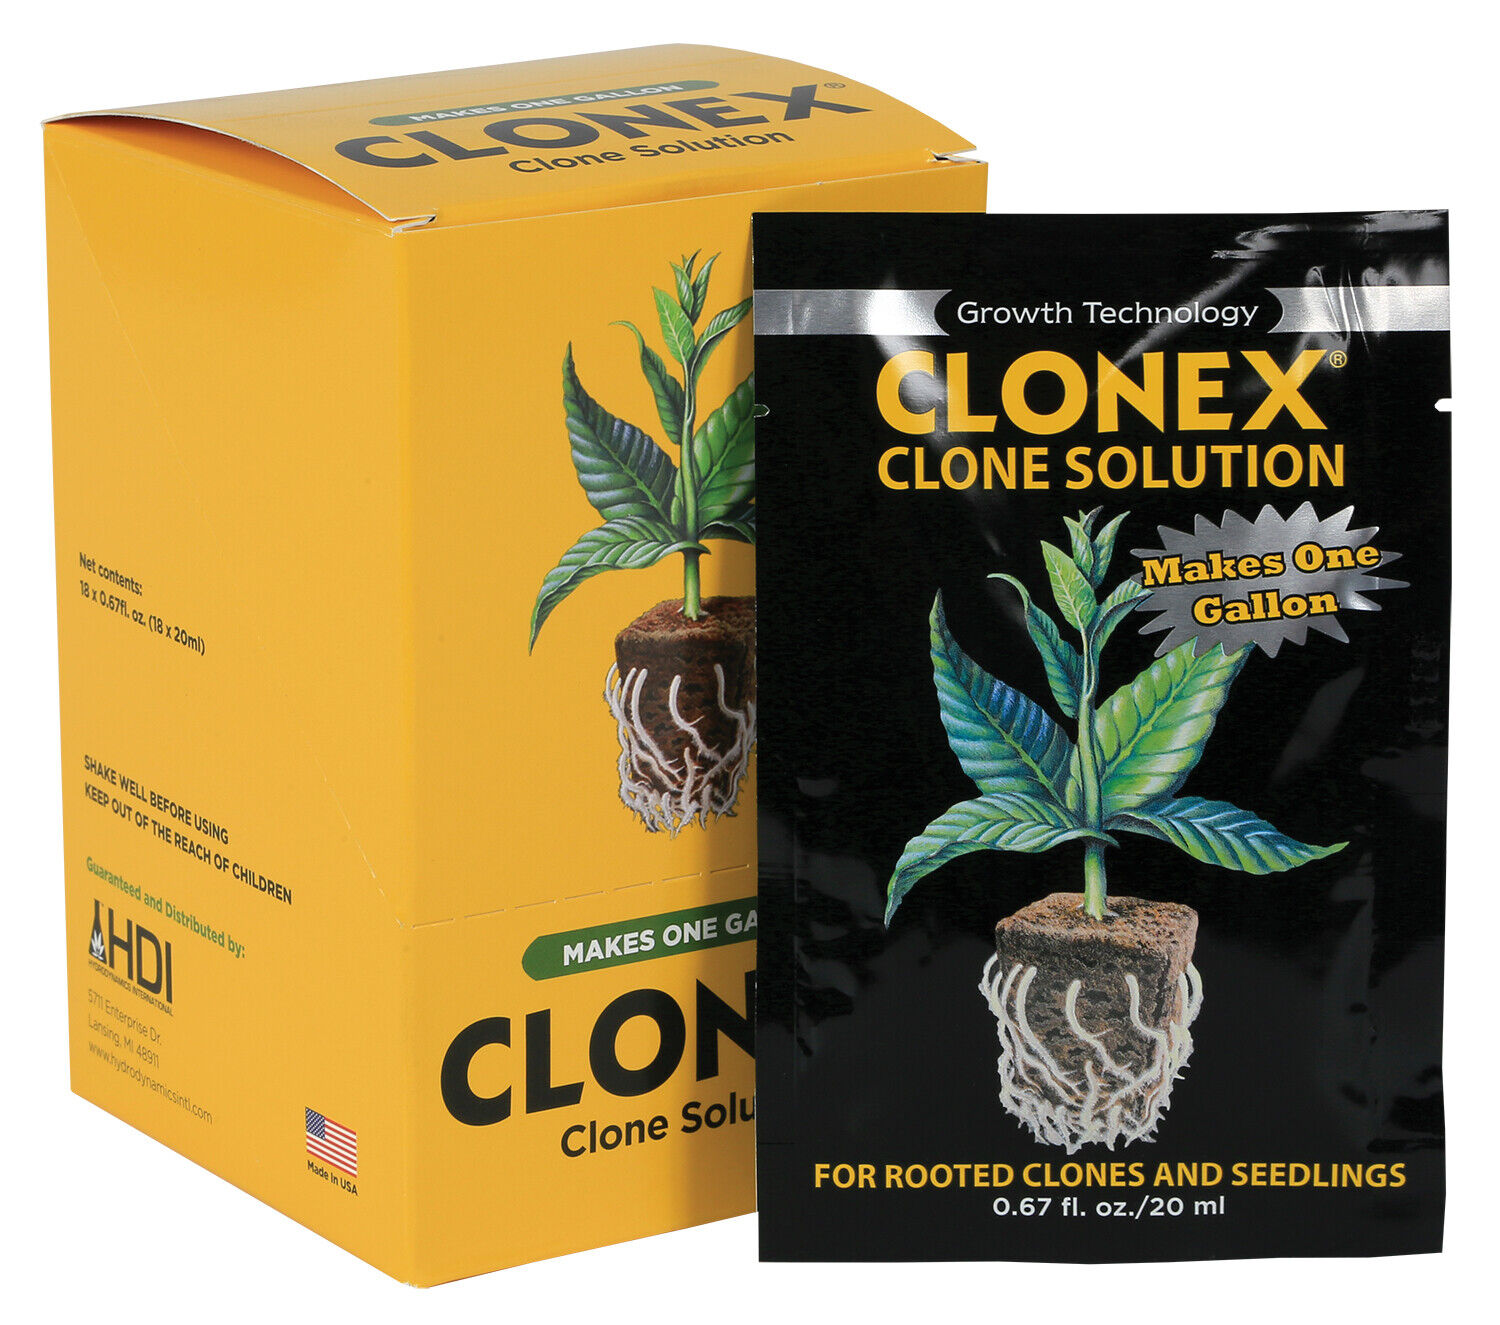 HDI Clonex Cloning Solution Concentrate 20ml - 2 pack - 40ml Total Makes 2 Gals